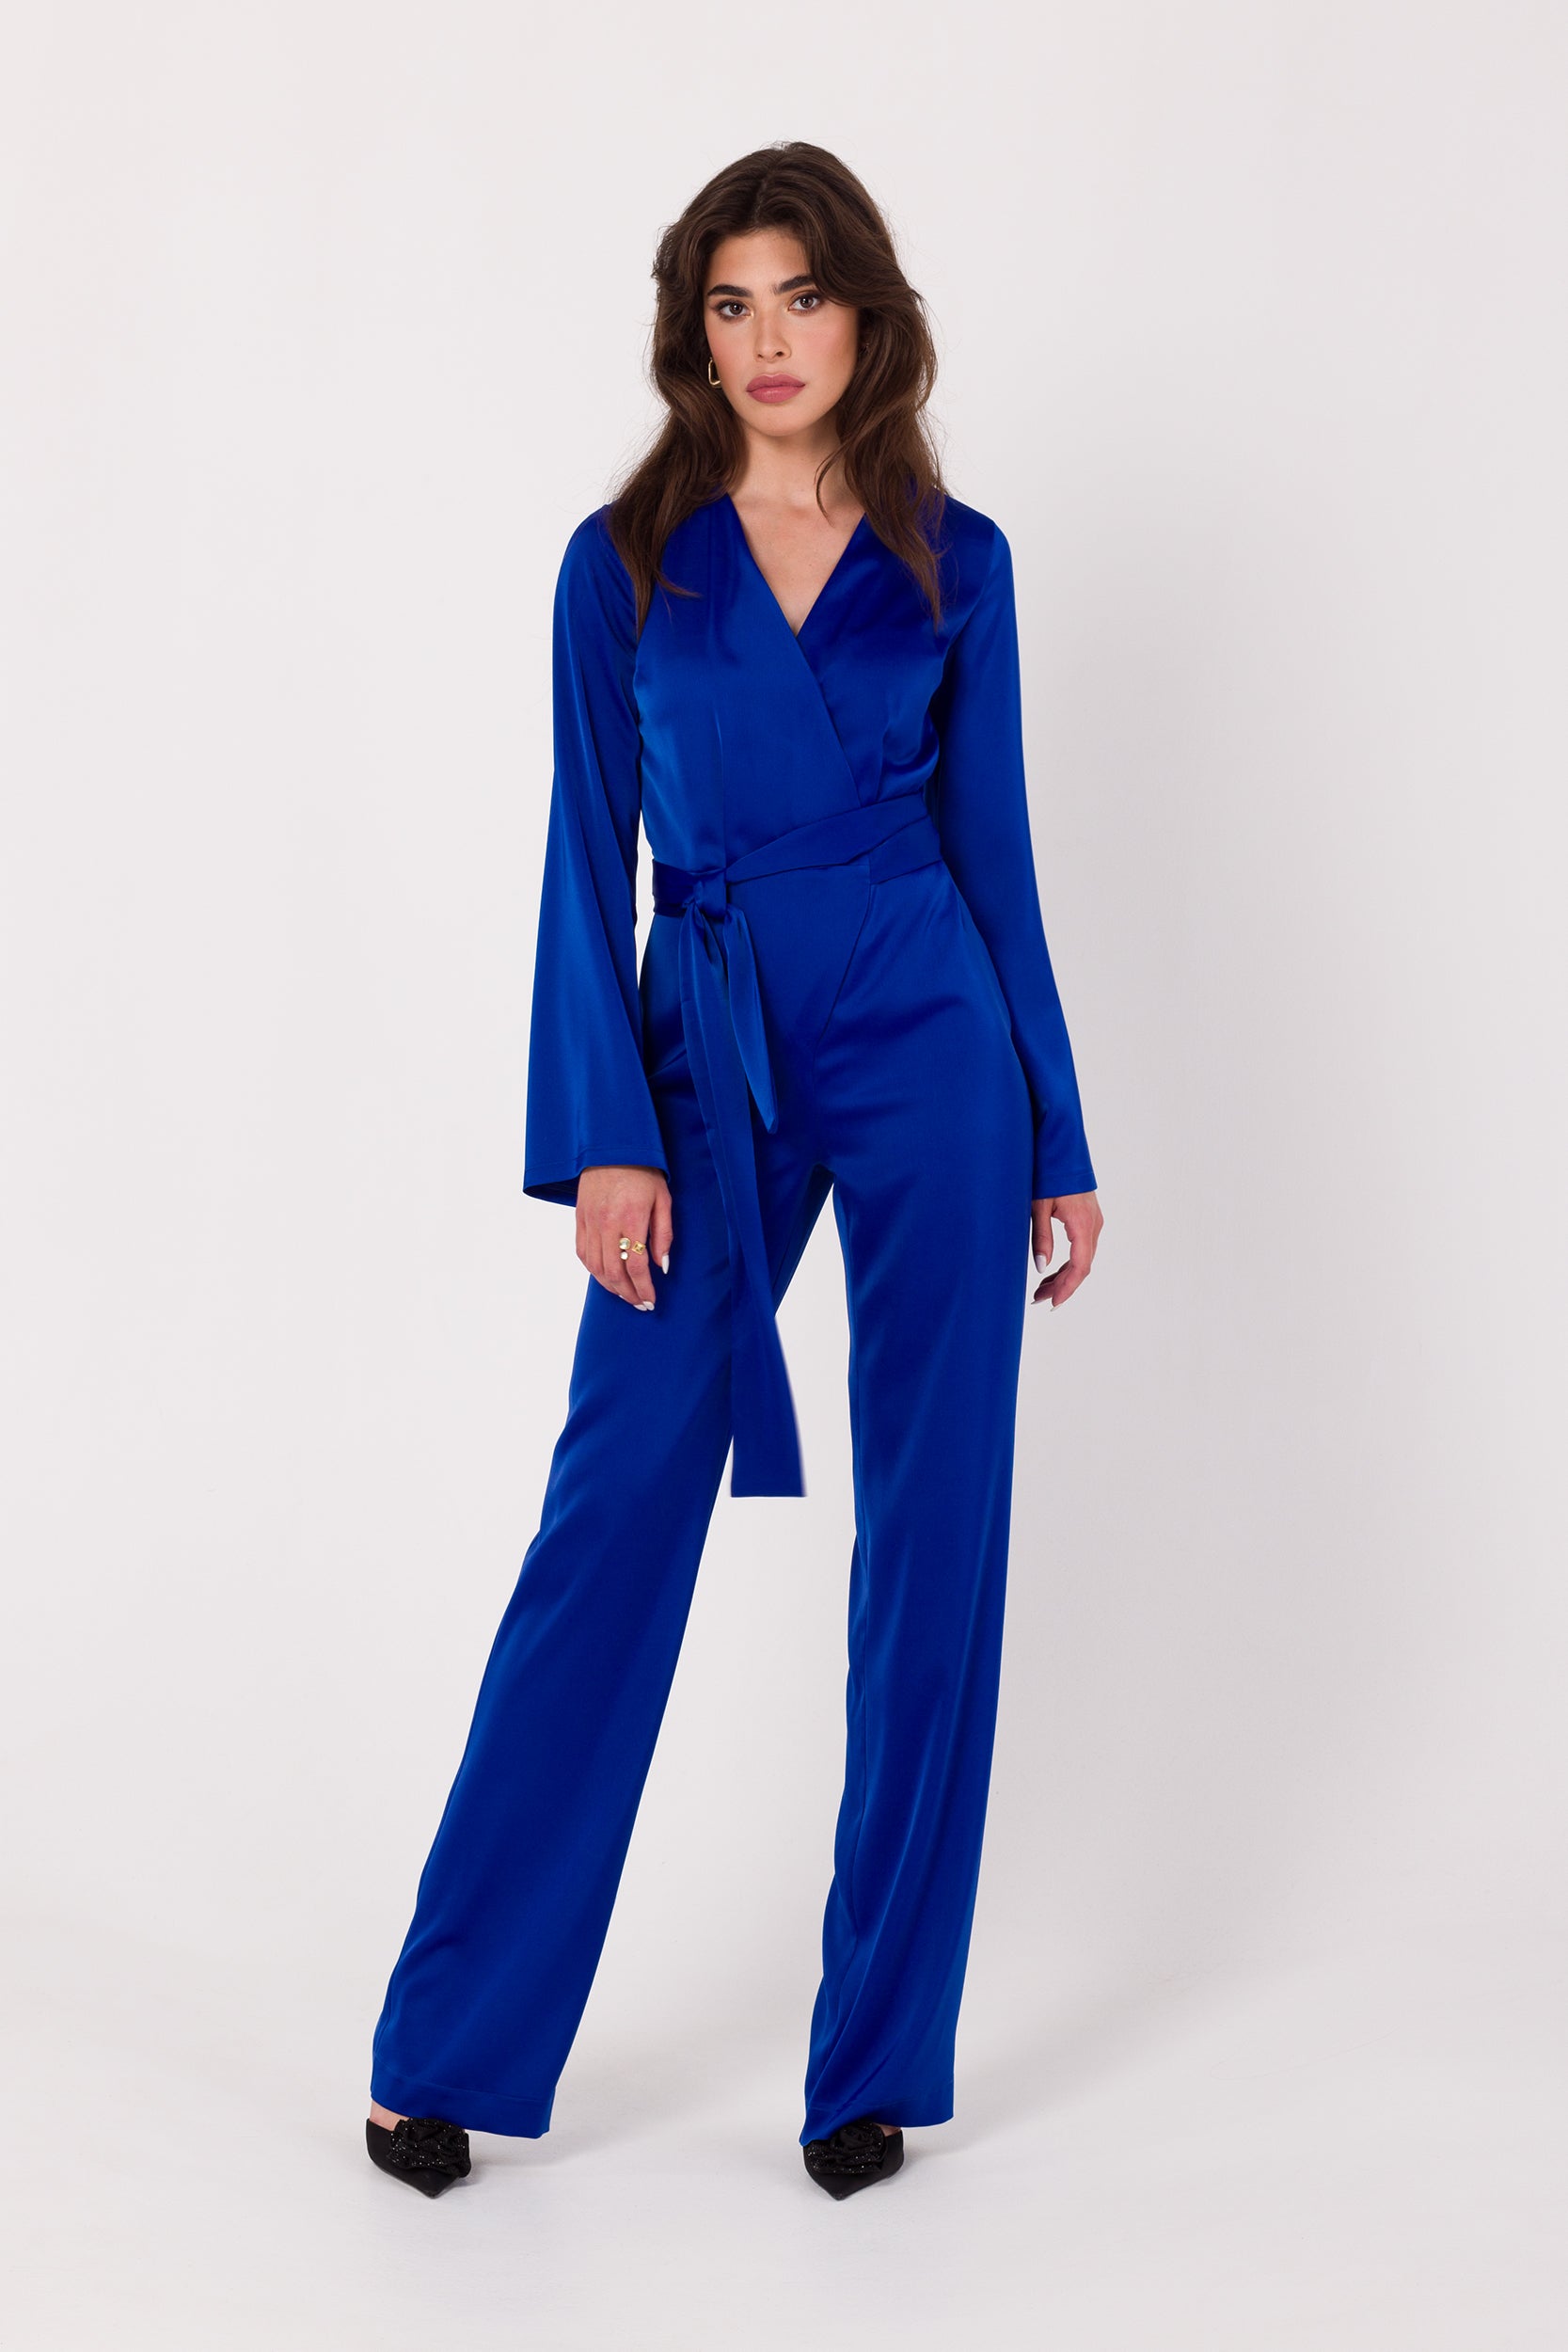 Long Sleeve Blue Satin Jumpsuit | Strictly In | Make a statement at your next event with our Long Sleeve Satin Jumpsuit. Crafted from luxurious satin, it features a V-neck, long sleeves, and a tied waist for a glamorous yet comfortable look. Perfect for the party season.